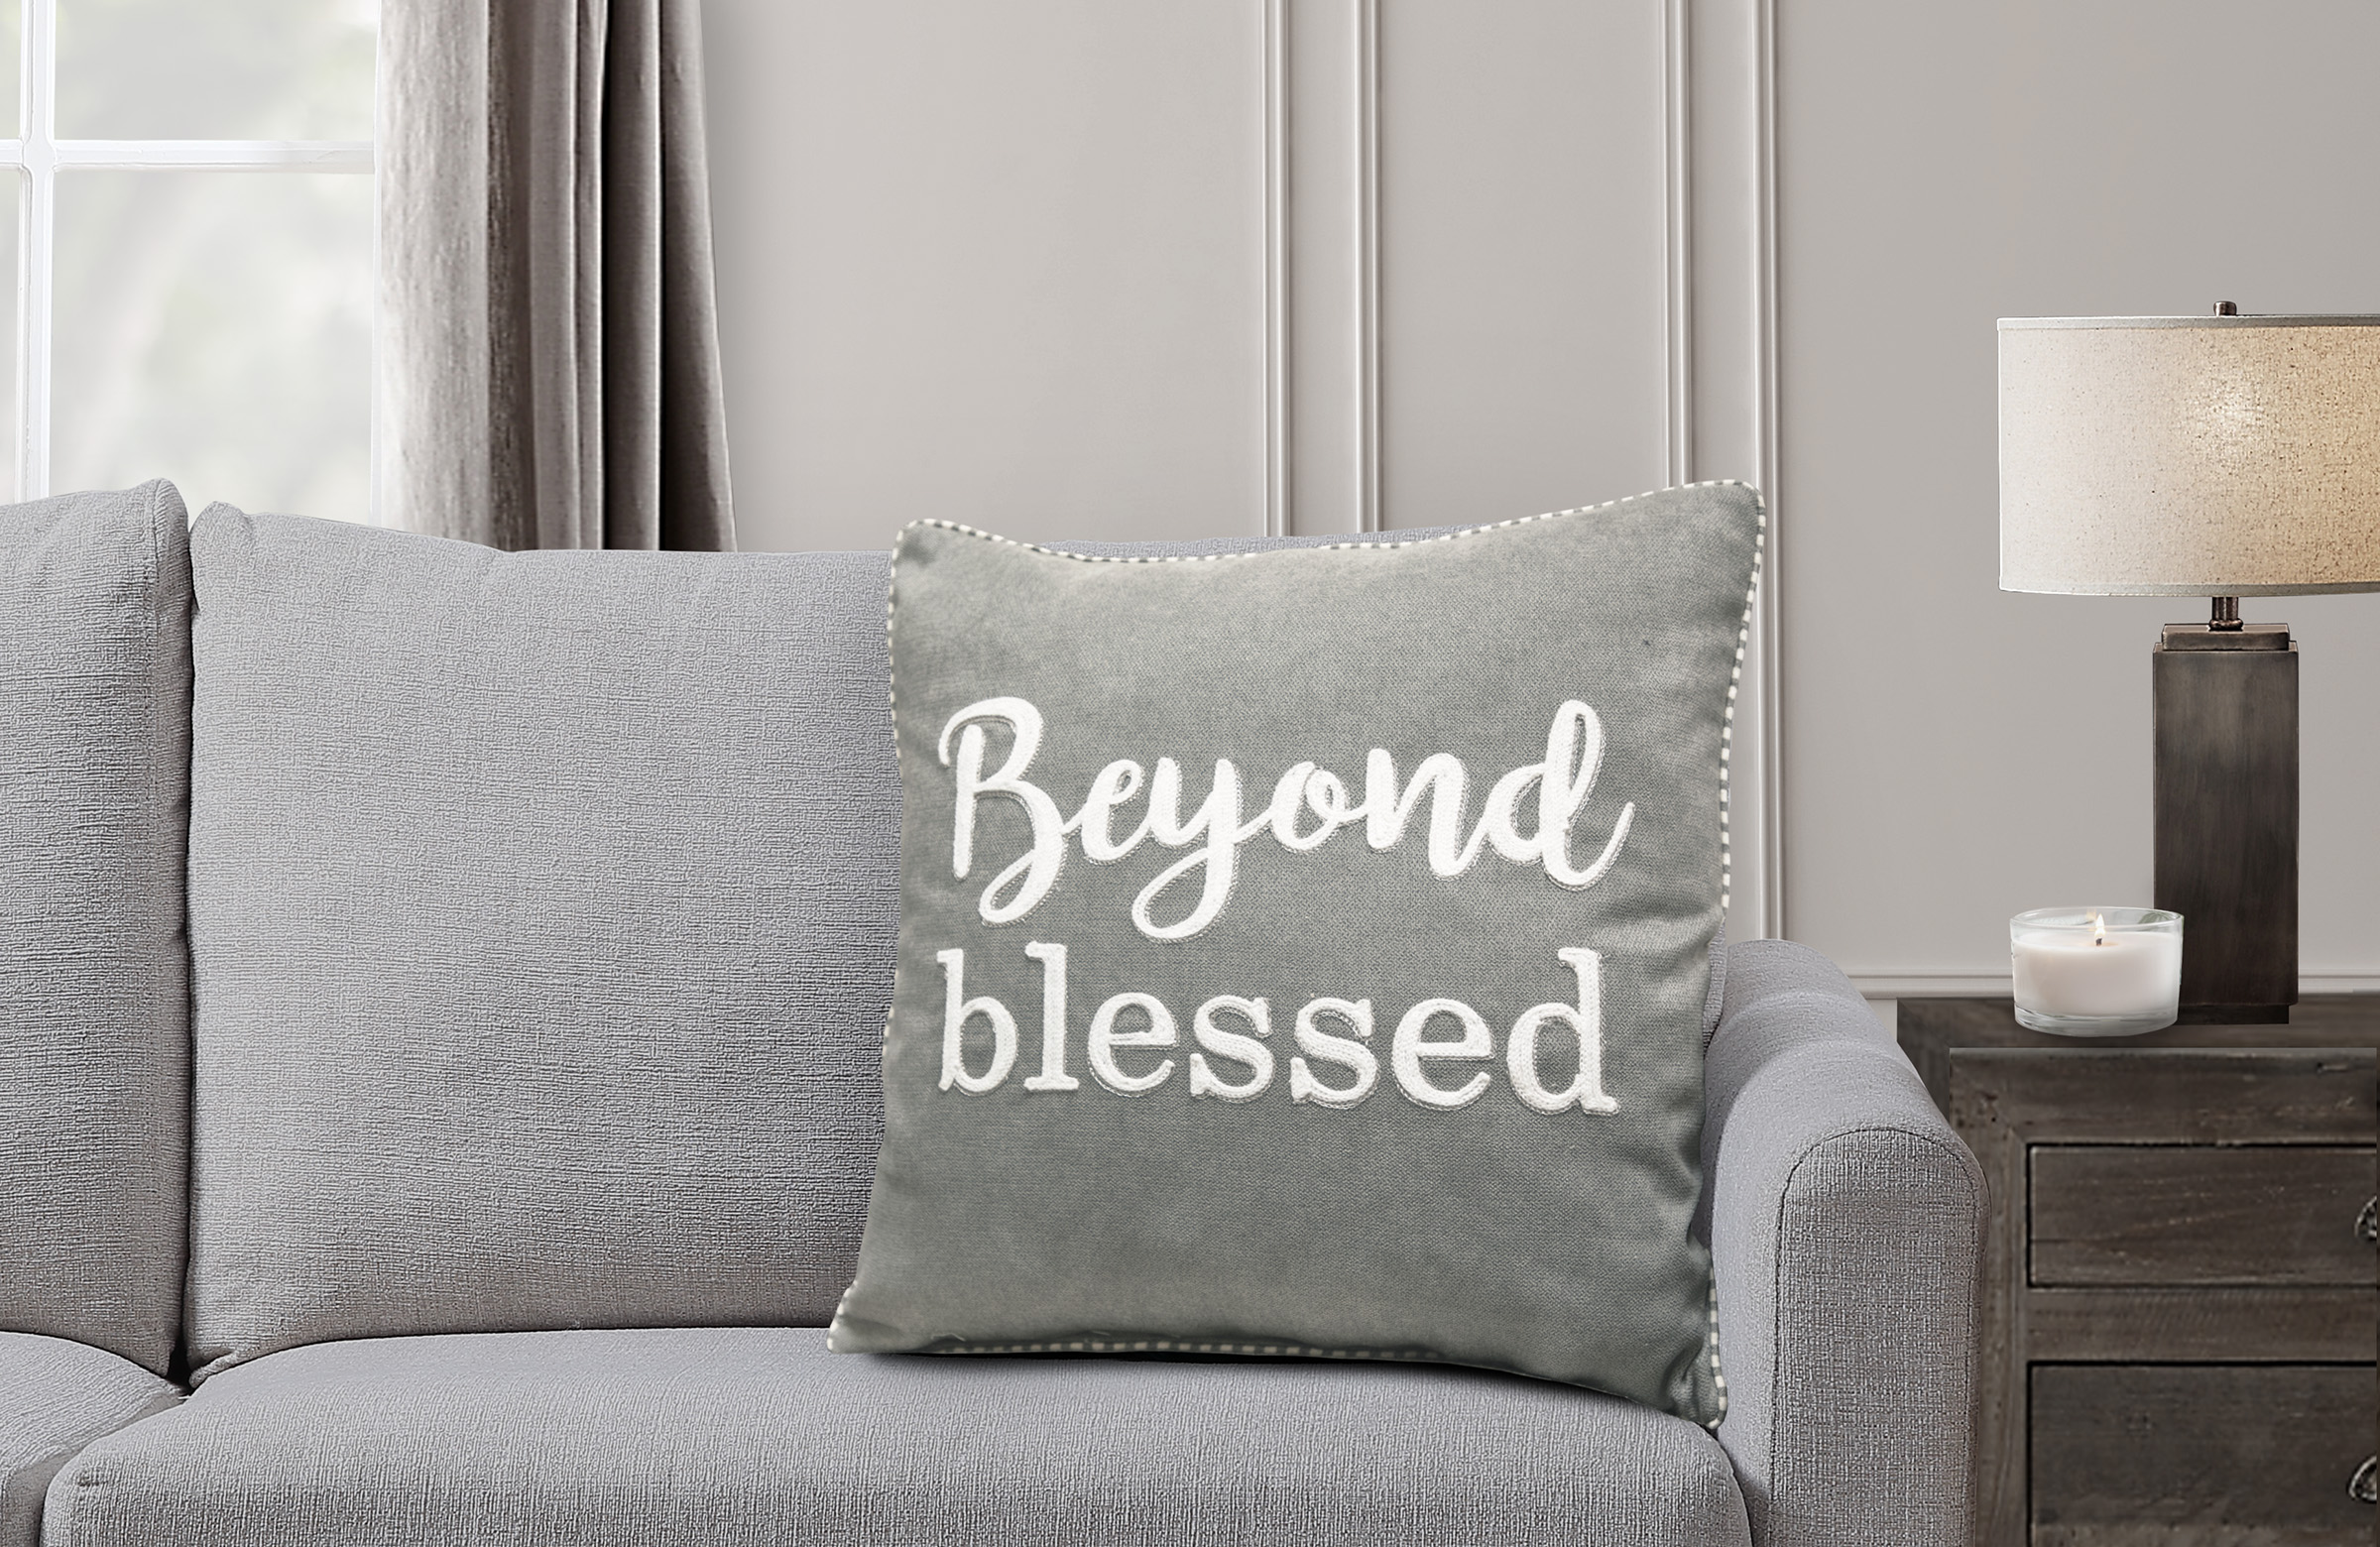 Mainstays Decorative Throw Pillow, Beyond Blessed Sentiment, Square, Grey, 18" x 18", 1Pack - image 2 of 5